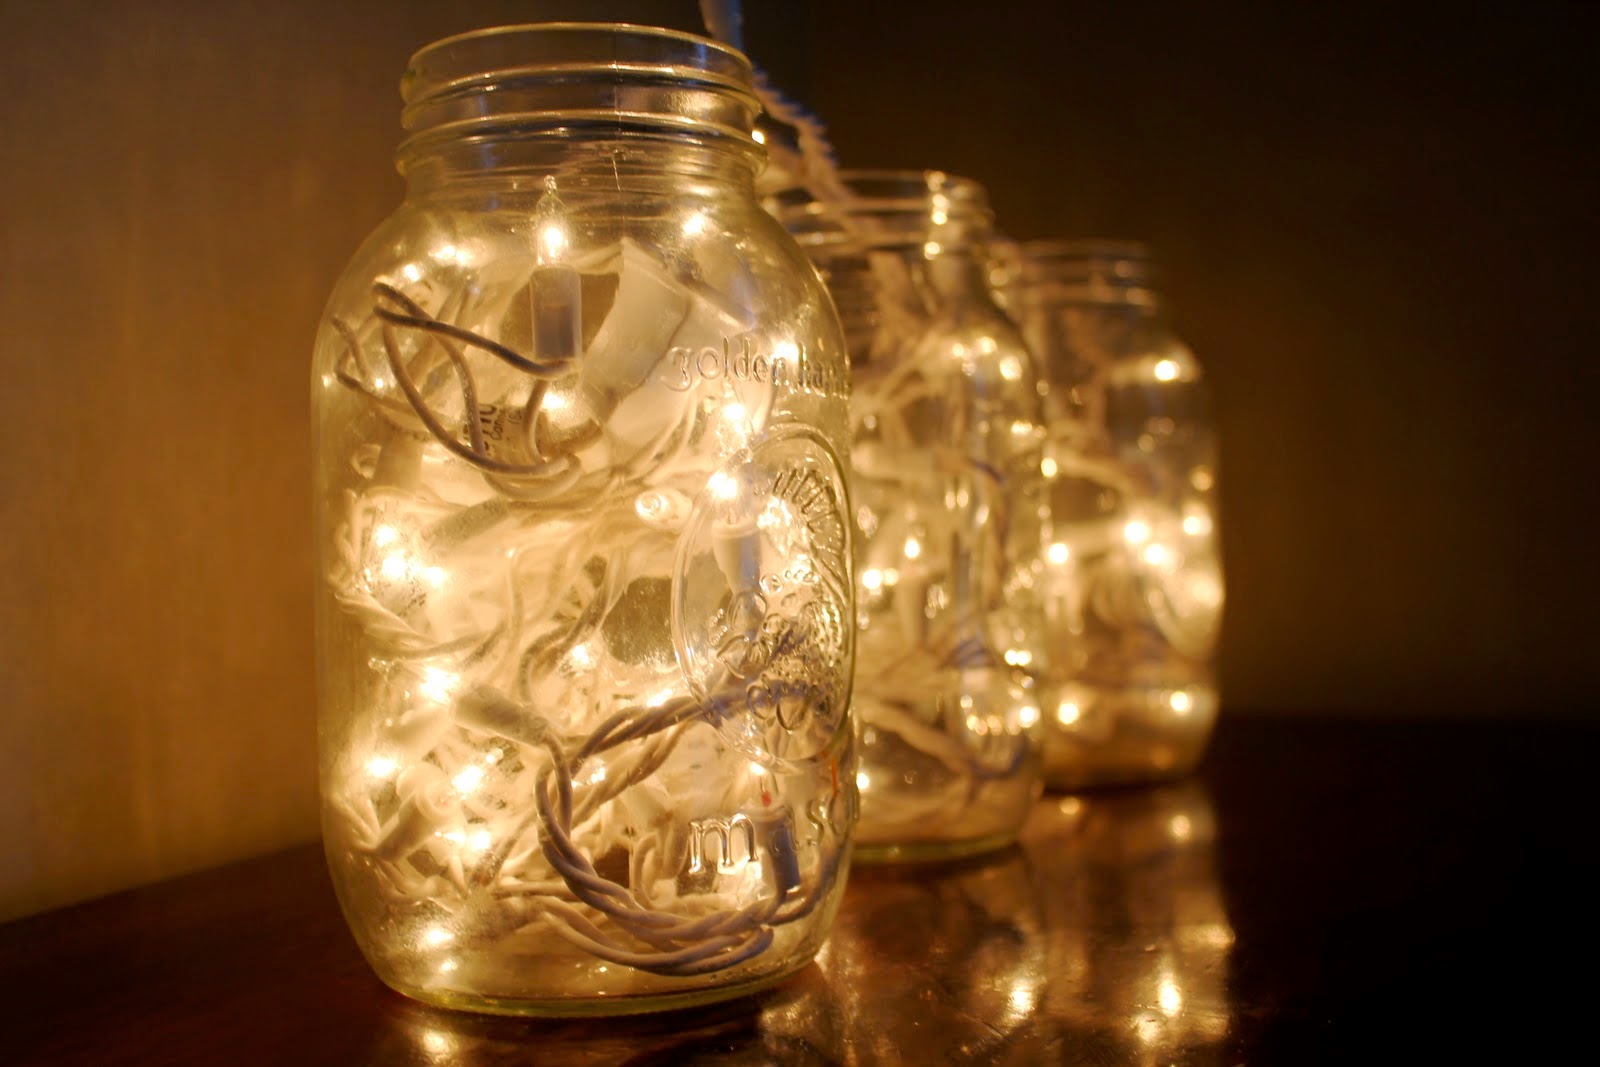 Check out these 16 creative ways to brighten up your home with fairy lights! Design   